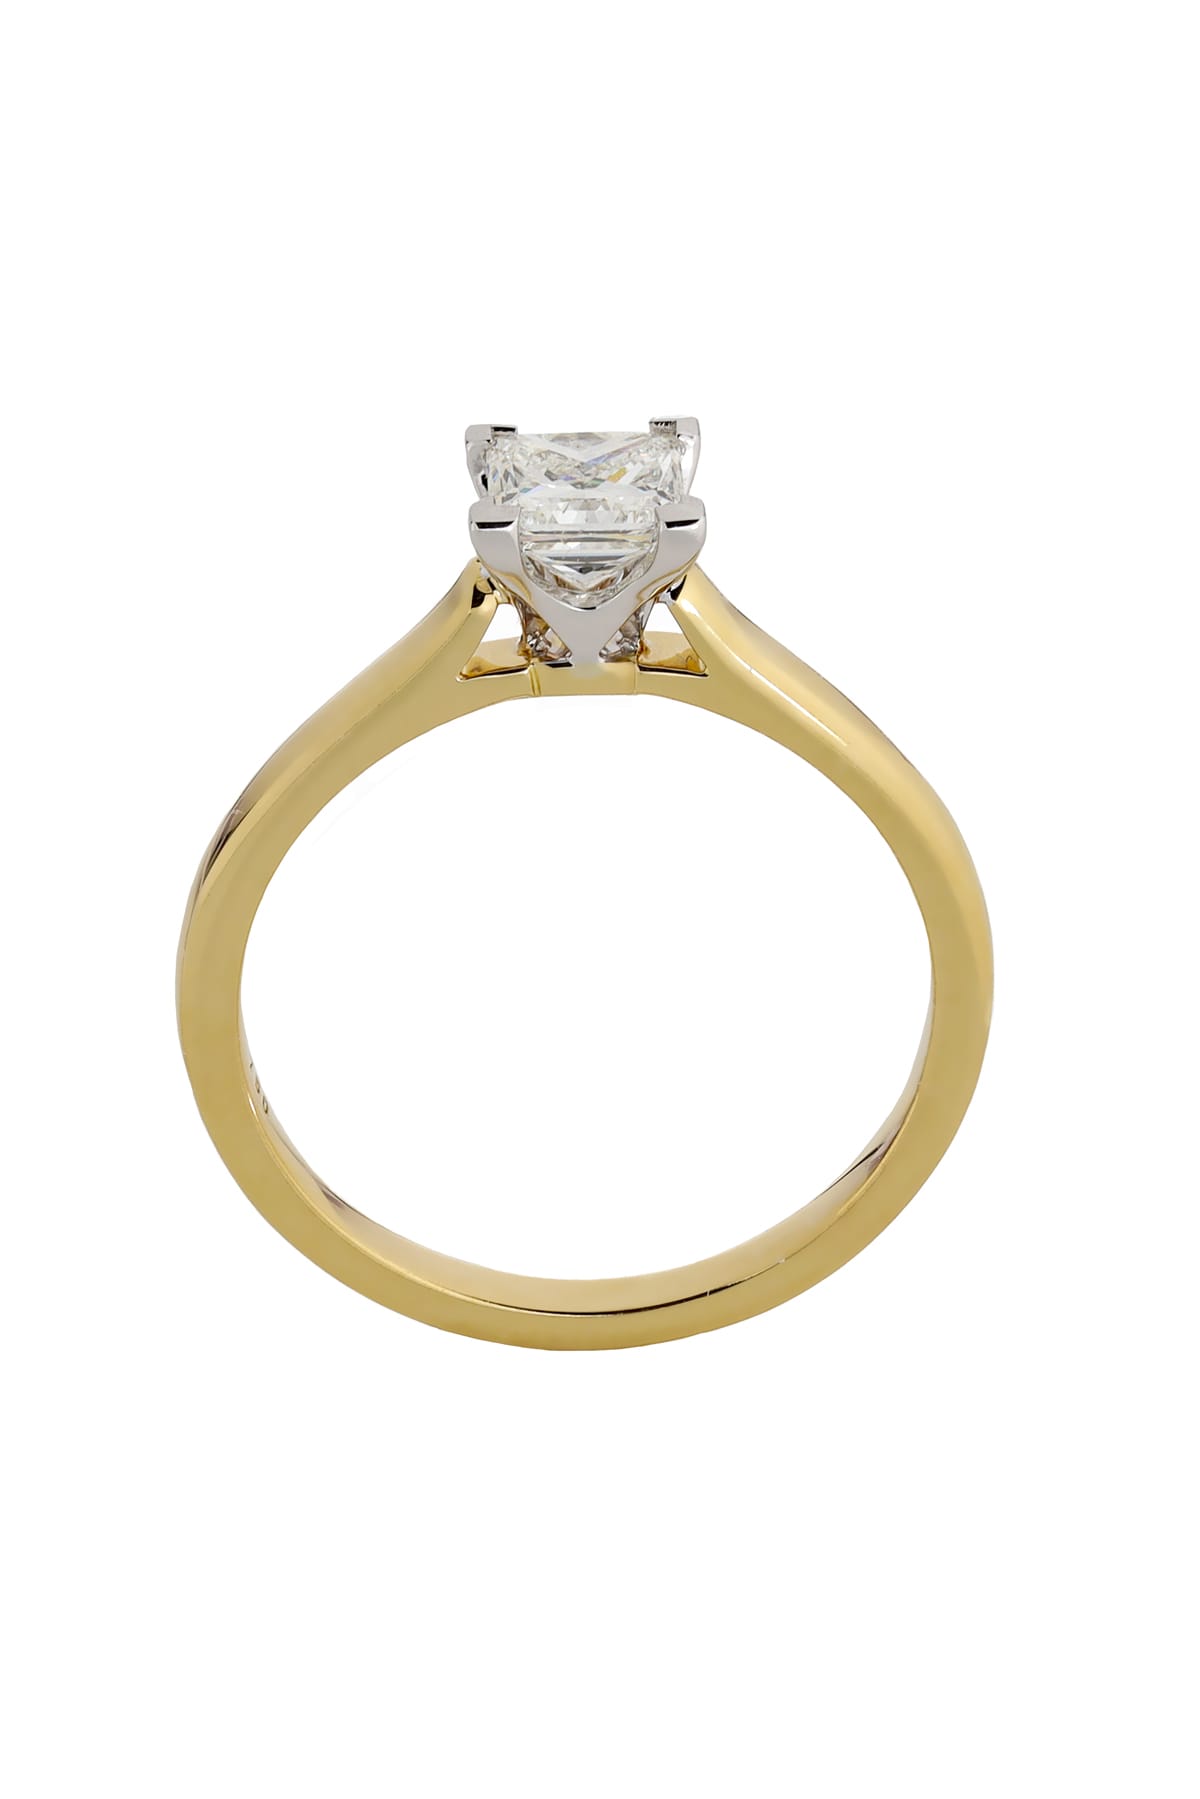 18 Carat Gold With 0.70 Carat Princess Cut Solitaire Engagement Ring available at LeGassick Diamonds and Jewellery Gold Coast, Australia.